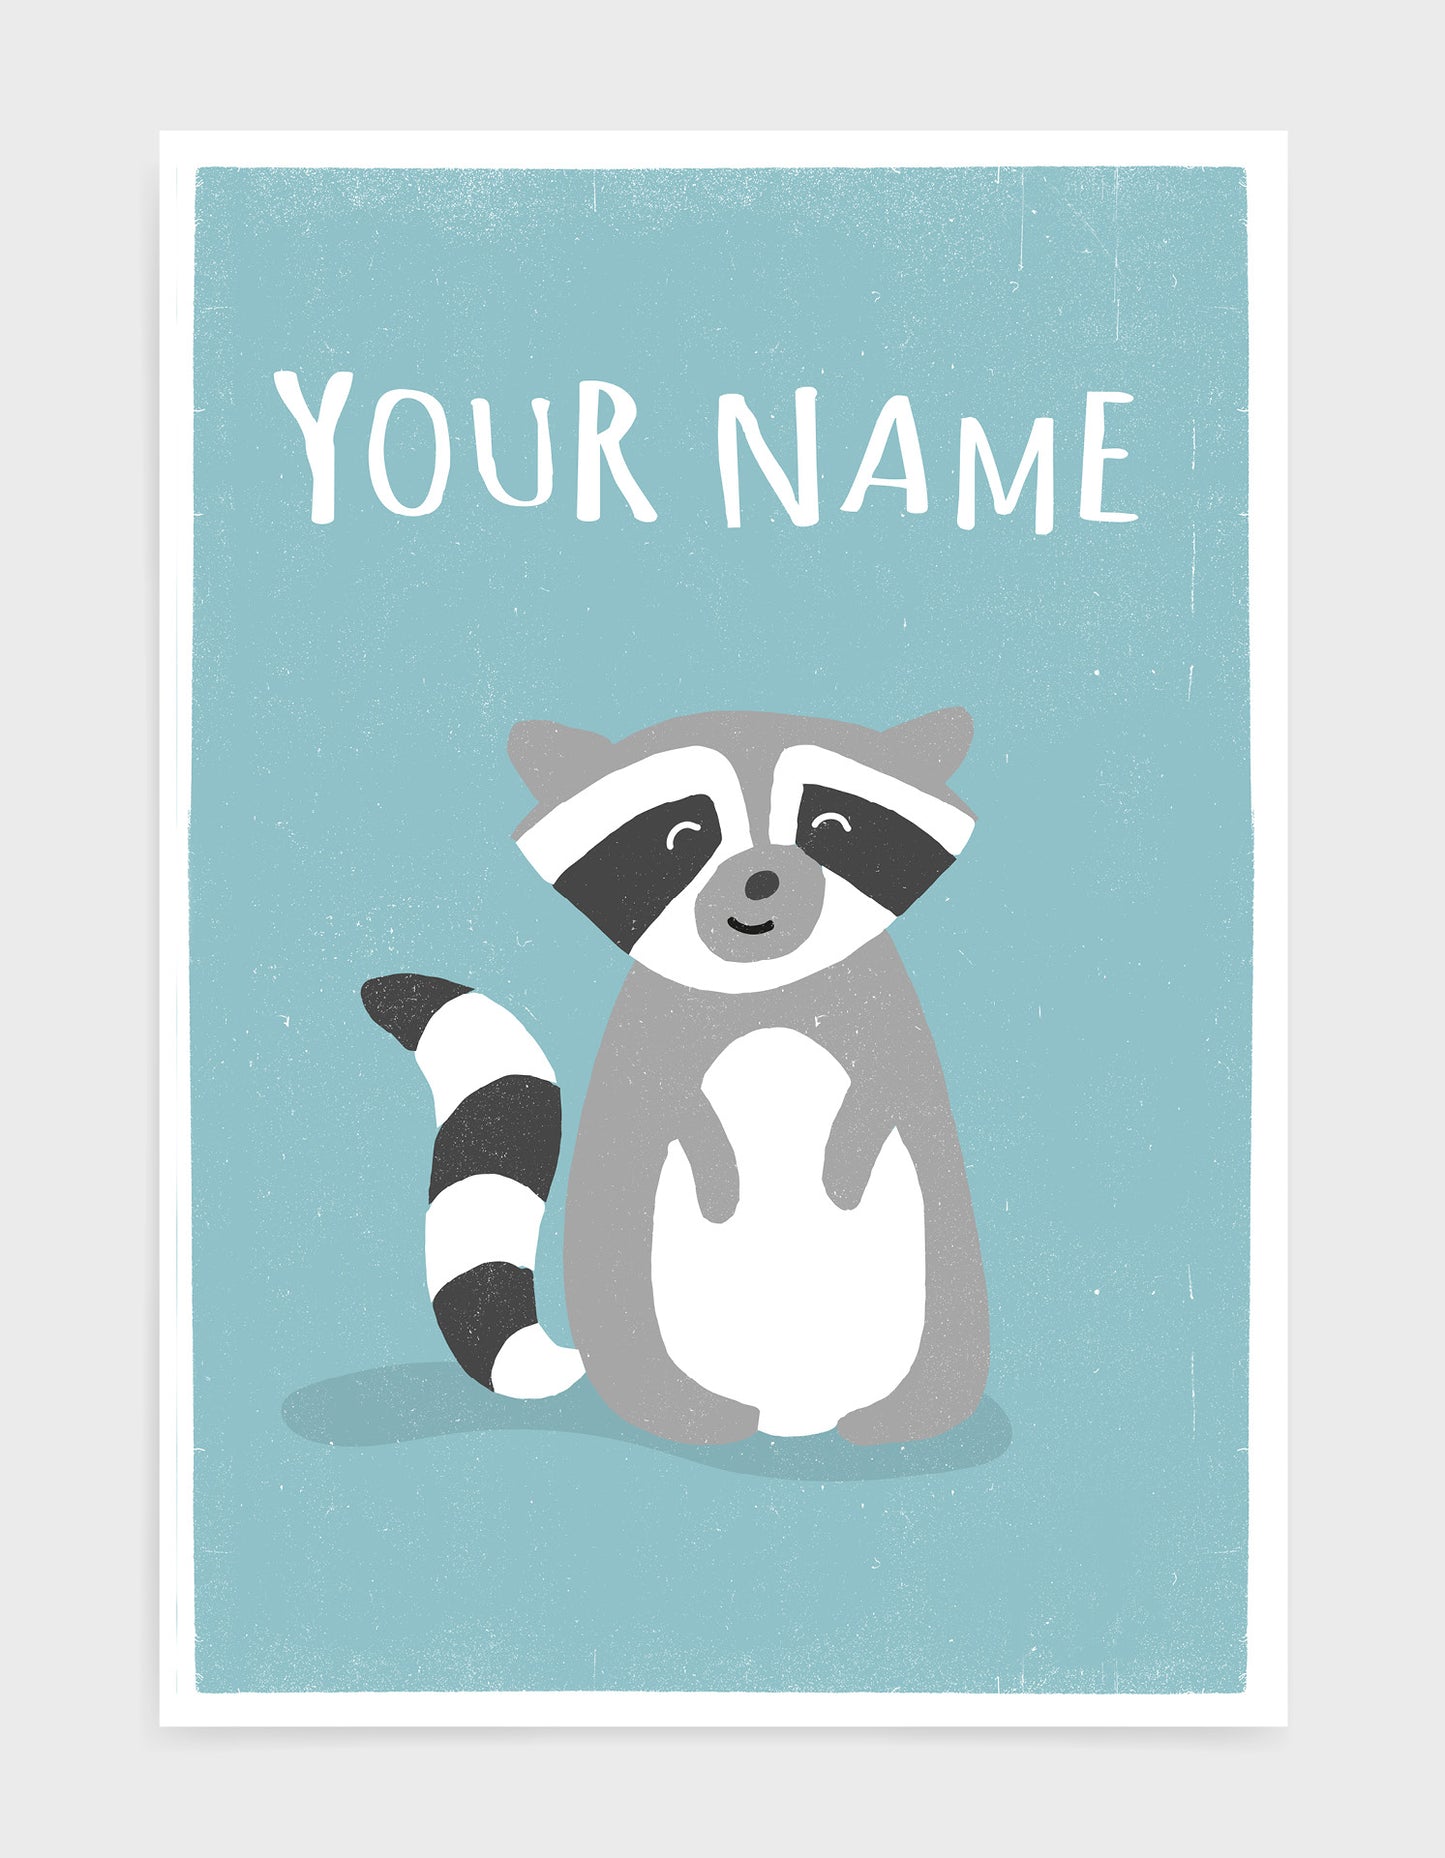 art print of a cute racoon on a light blue background with the words your name above as the product is available for personalisation